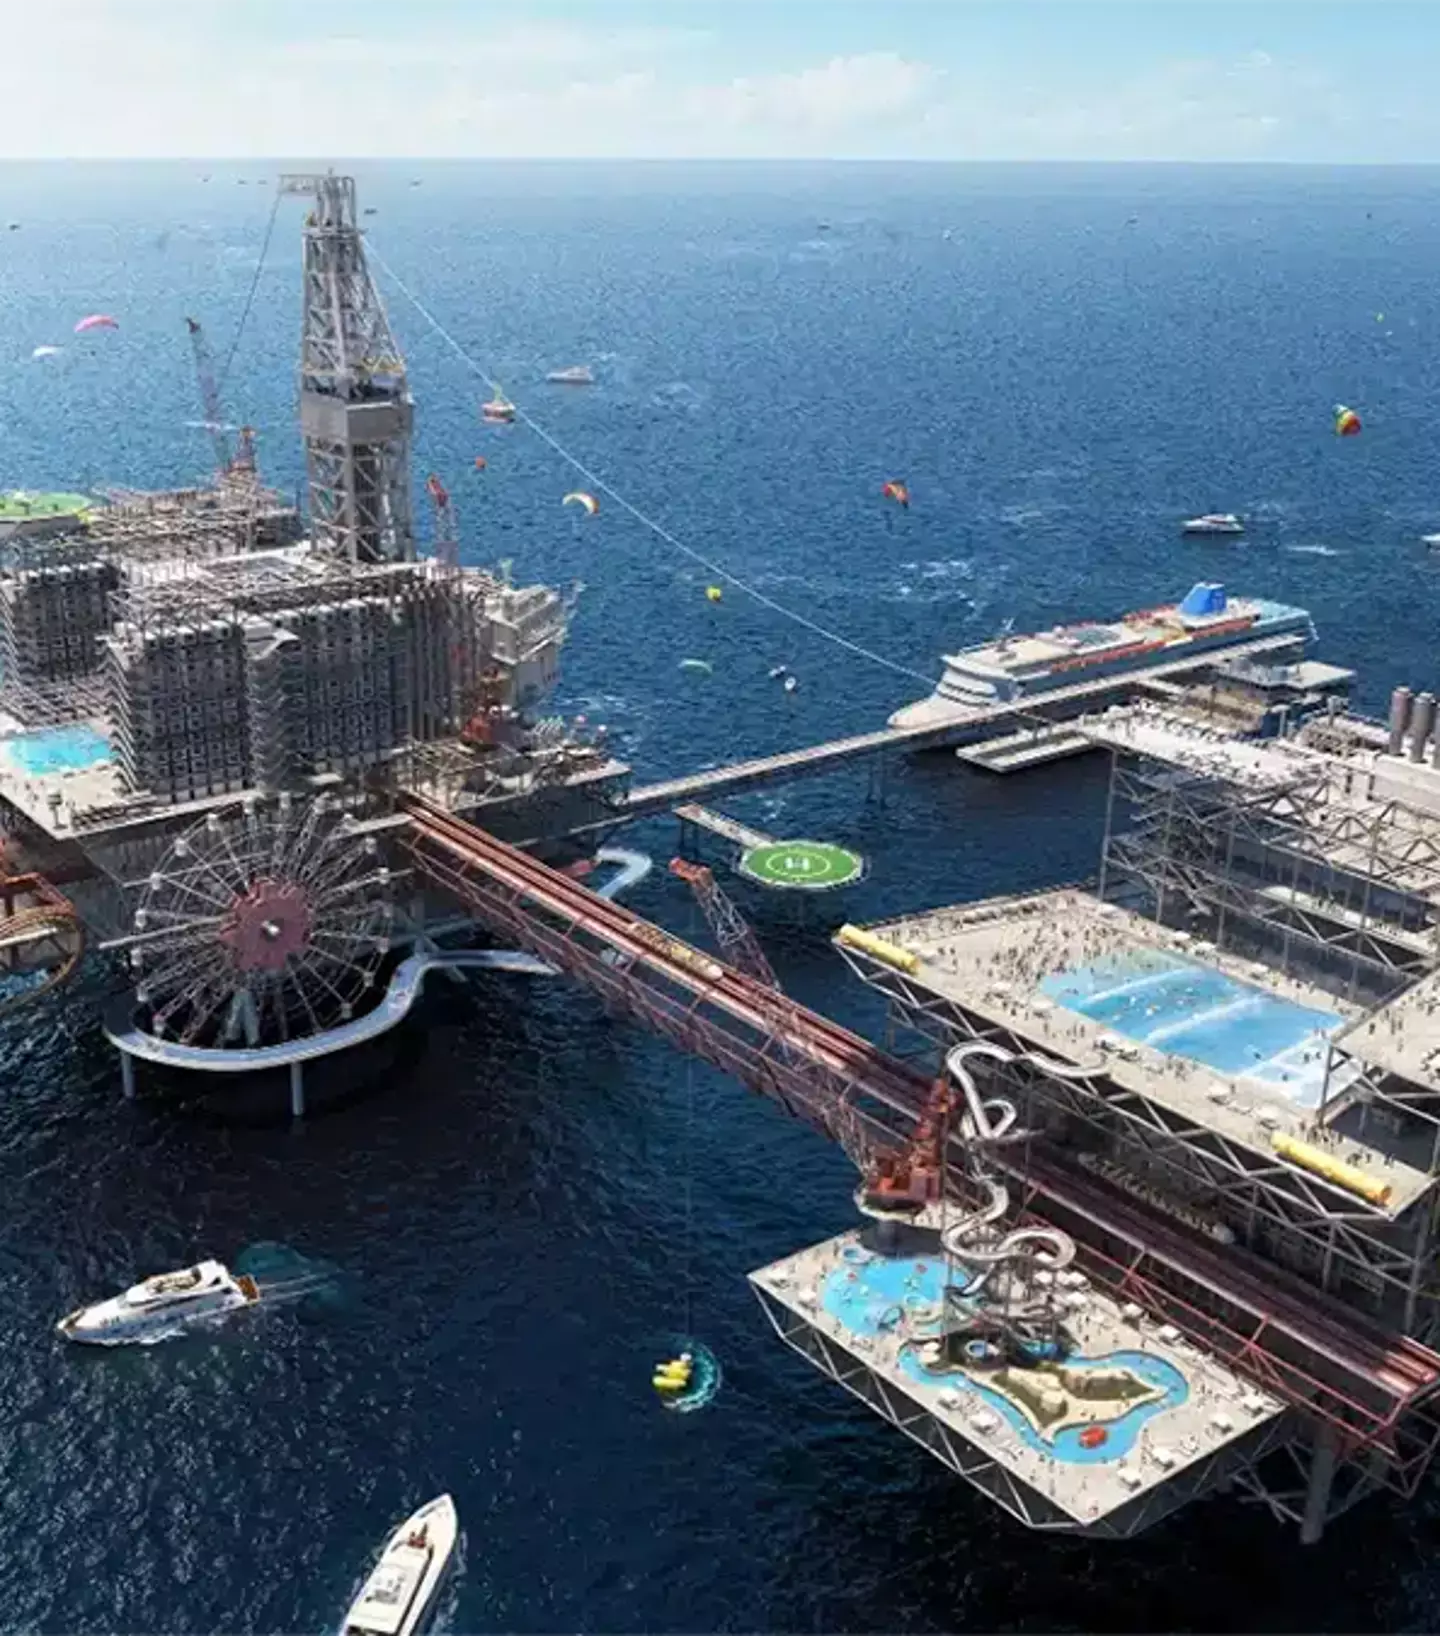 The Rig will sit atop the Arabian Gulf / Public Investment Fund